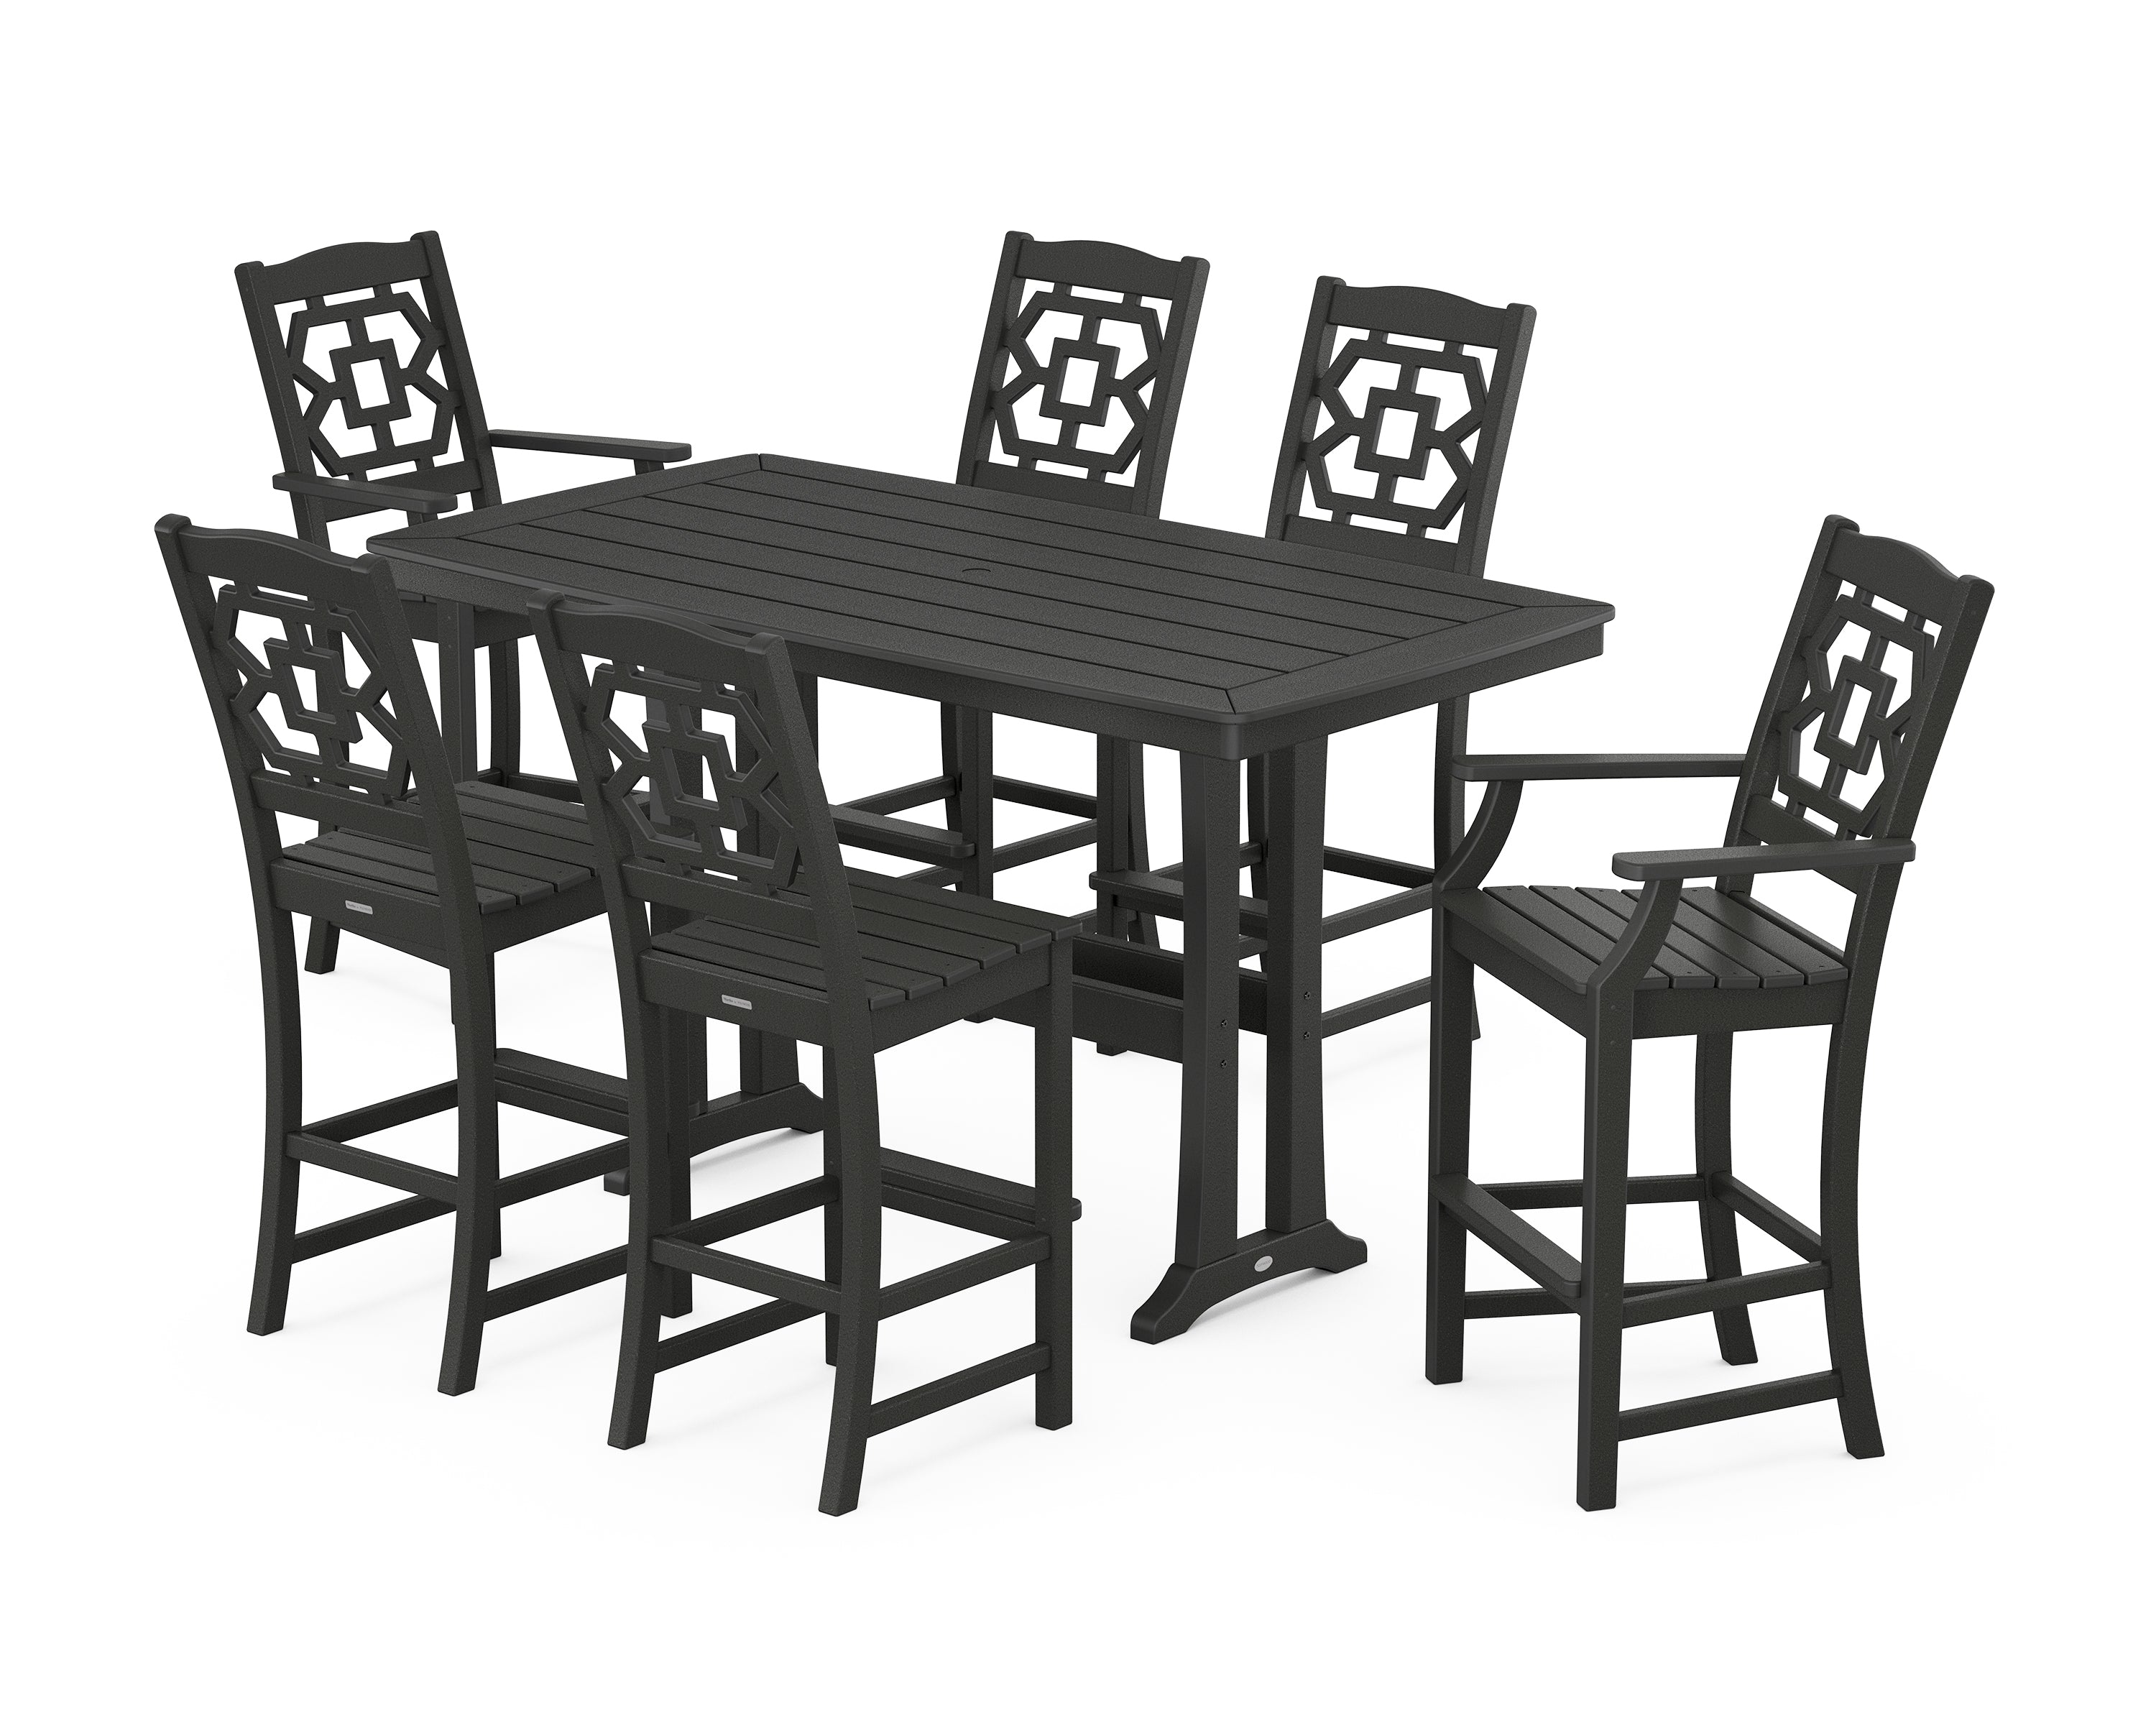 Martha Stewart by POLYWOOD® Chinoiserie 7-Piece Bar Set with Trestle Legs in Black